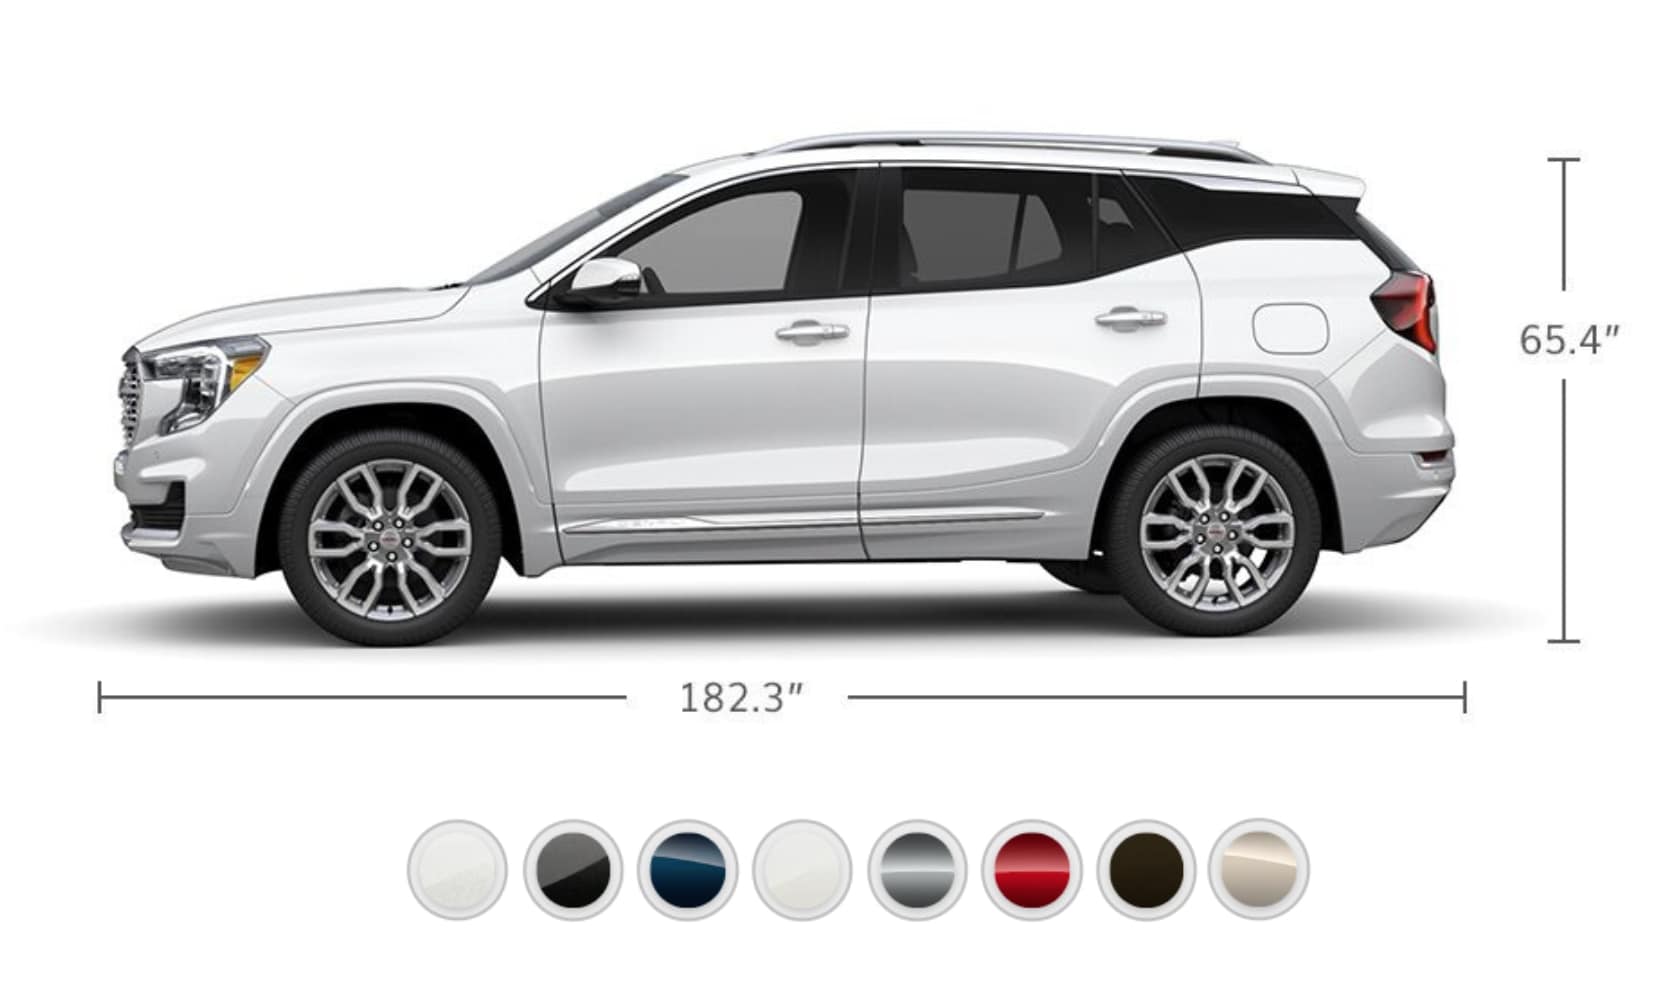 Diagram showing the exterior dimensions and paint colors of the 2023 GMC Terrain